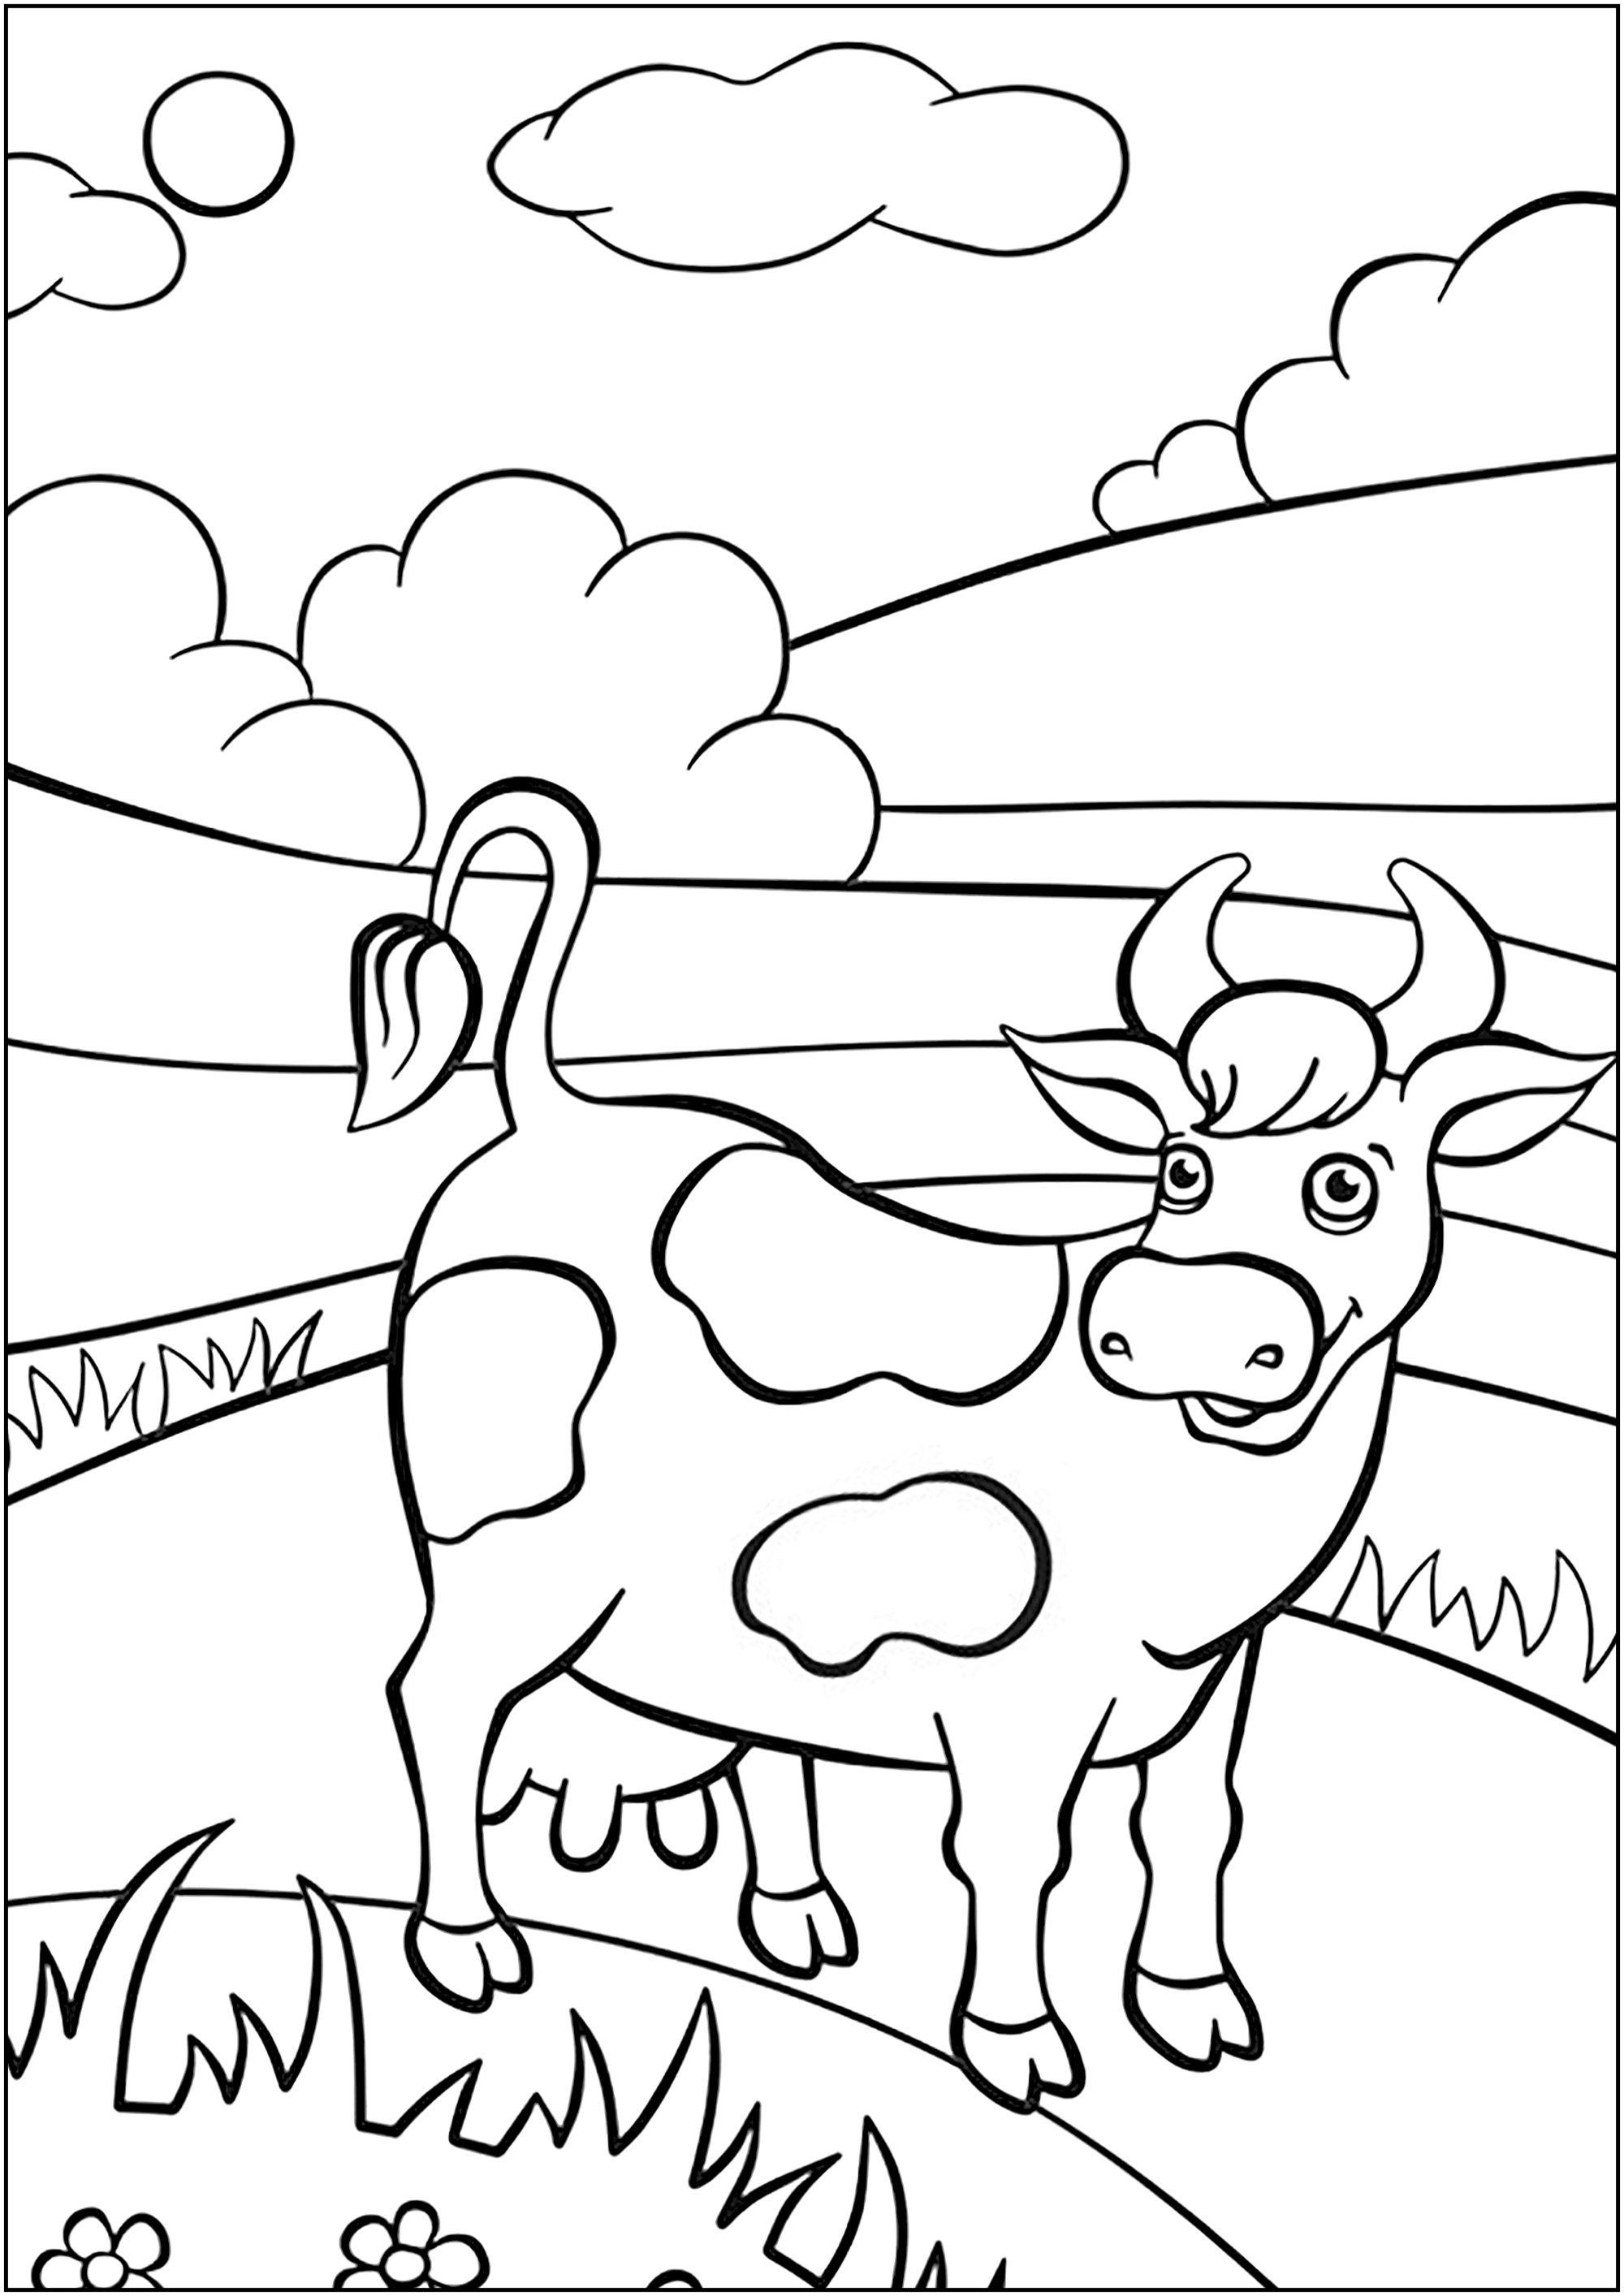 Pretty cow in a field - Cow Kids Coloring Pages